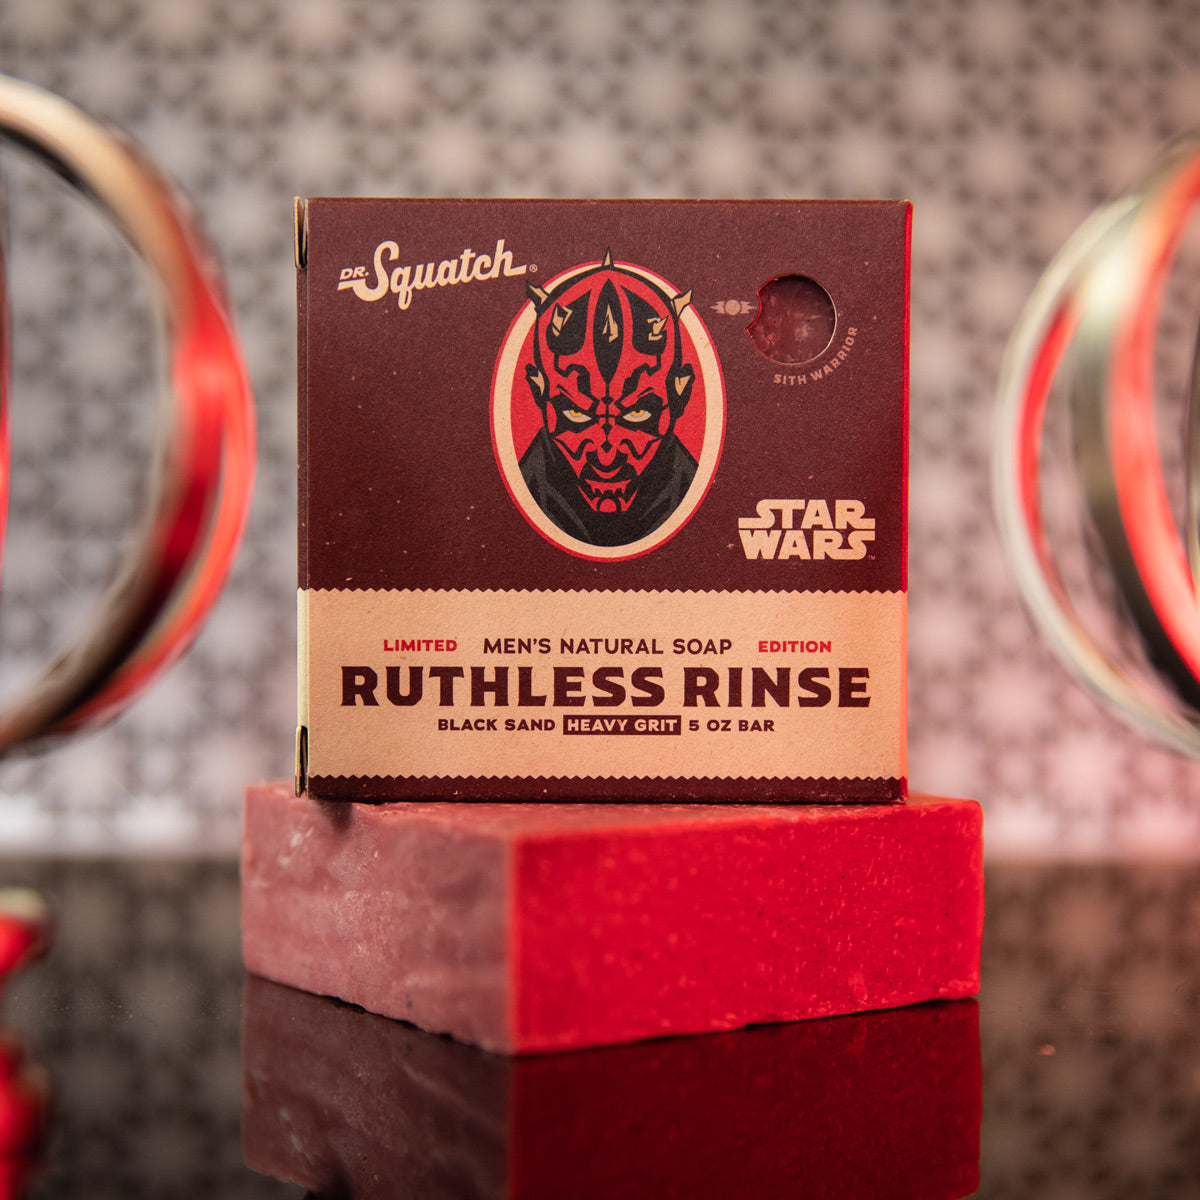 May the 4th Be With You - Dr. Squatch Soap Co